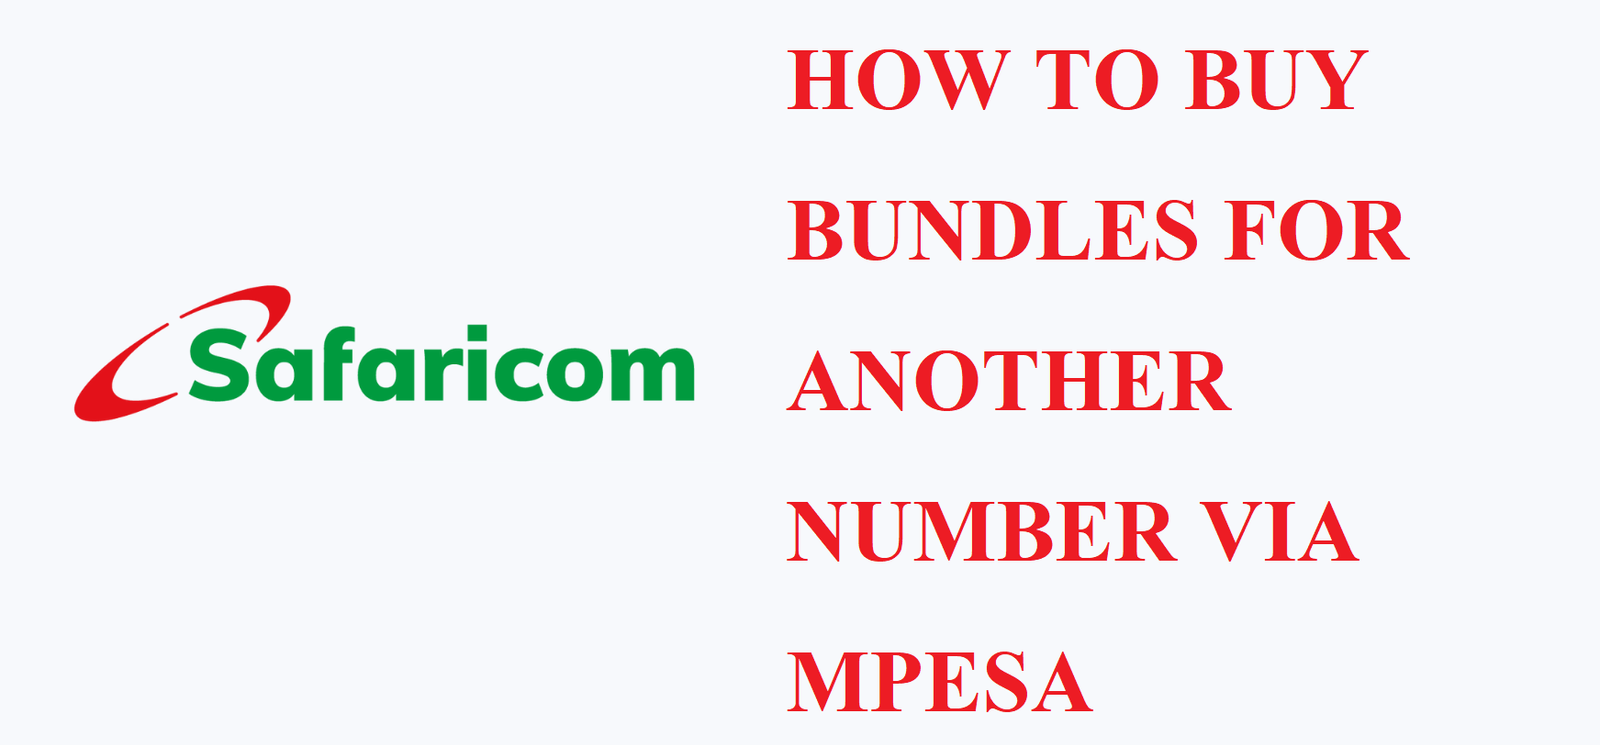 How to Buy Bundles for another Number via Mpesa